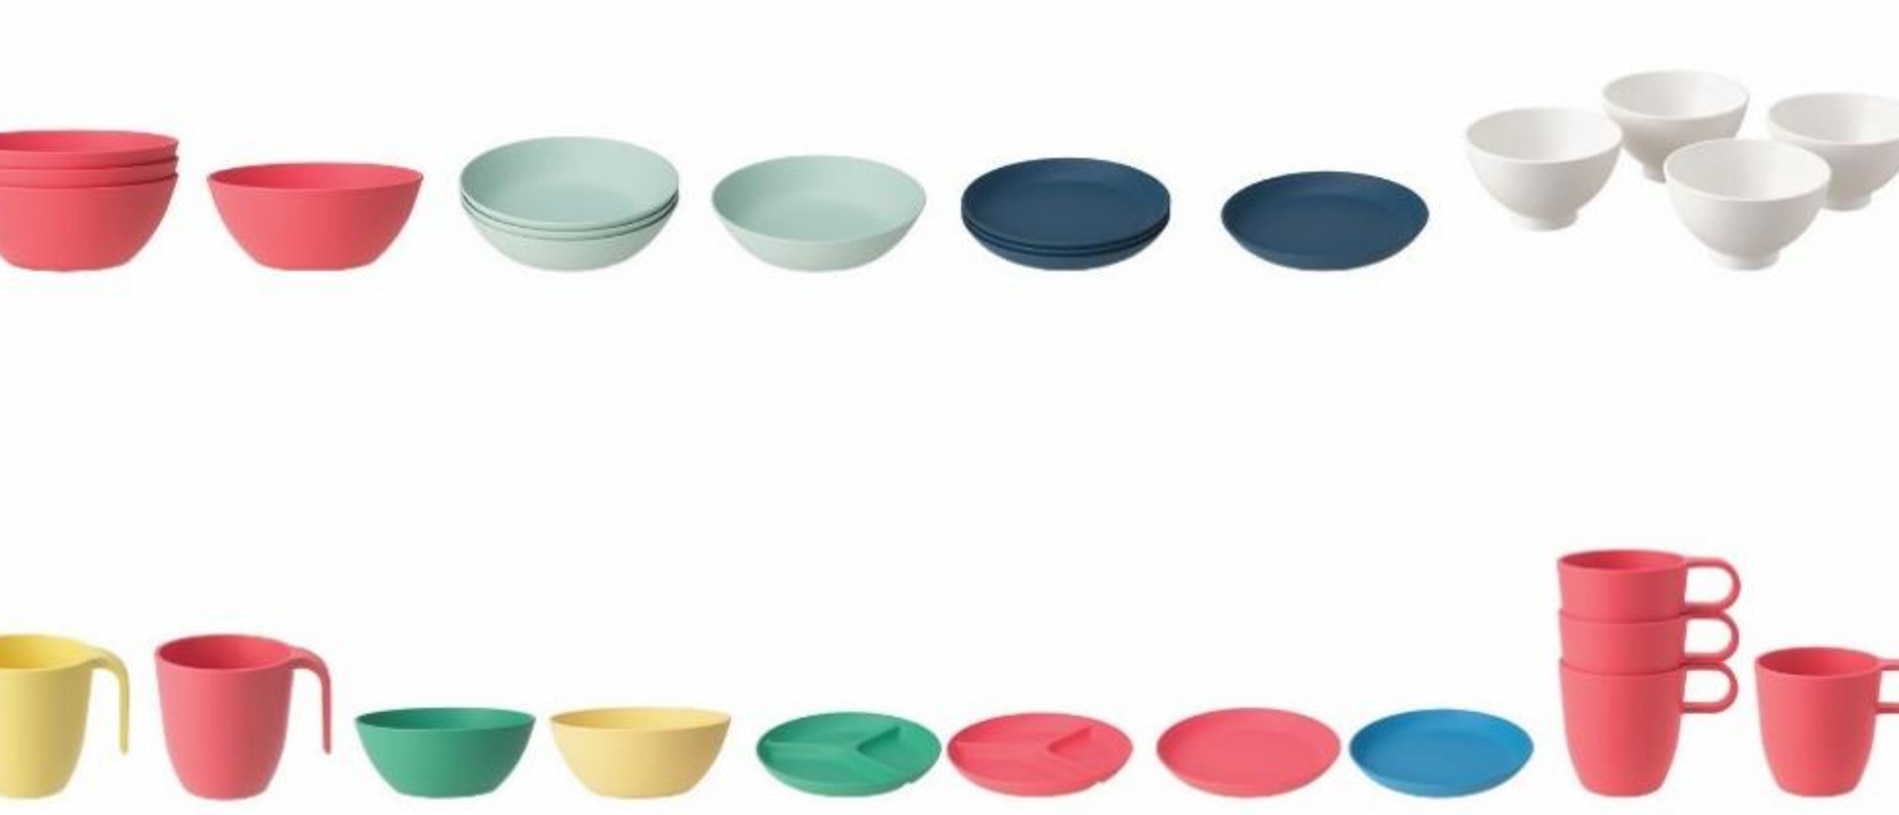 Ikea's HEROISK and TALRIKA ranges including plates, bowls and mugs has been urgently recalled. Picture: Product Safety